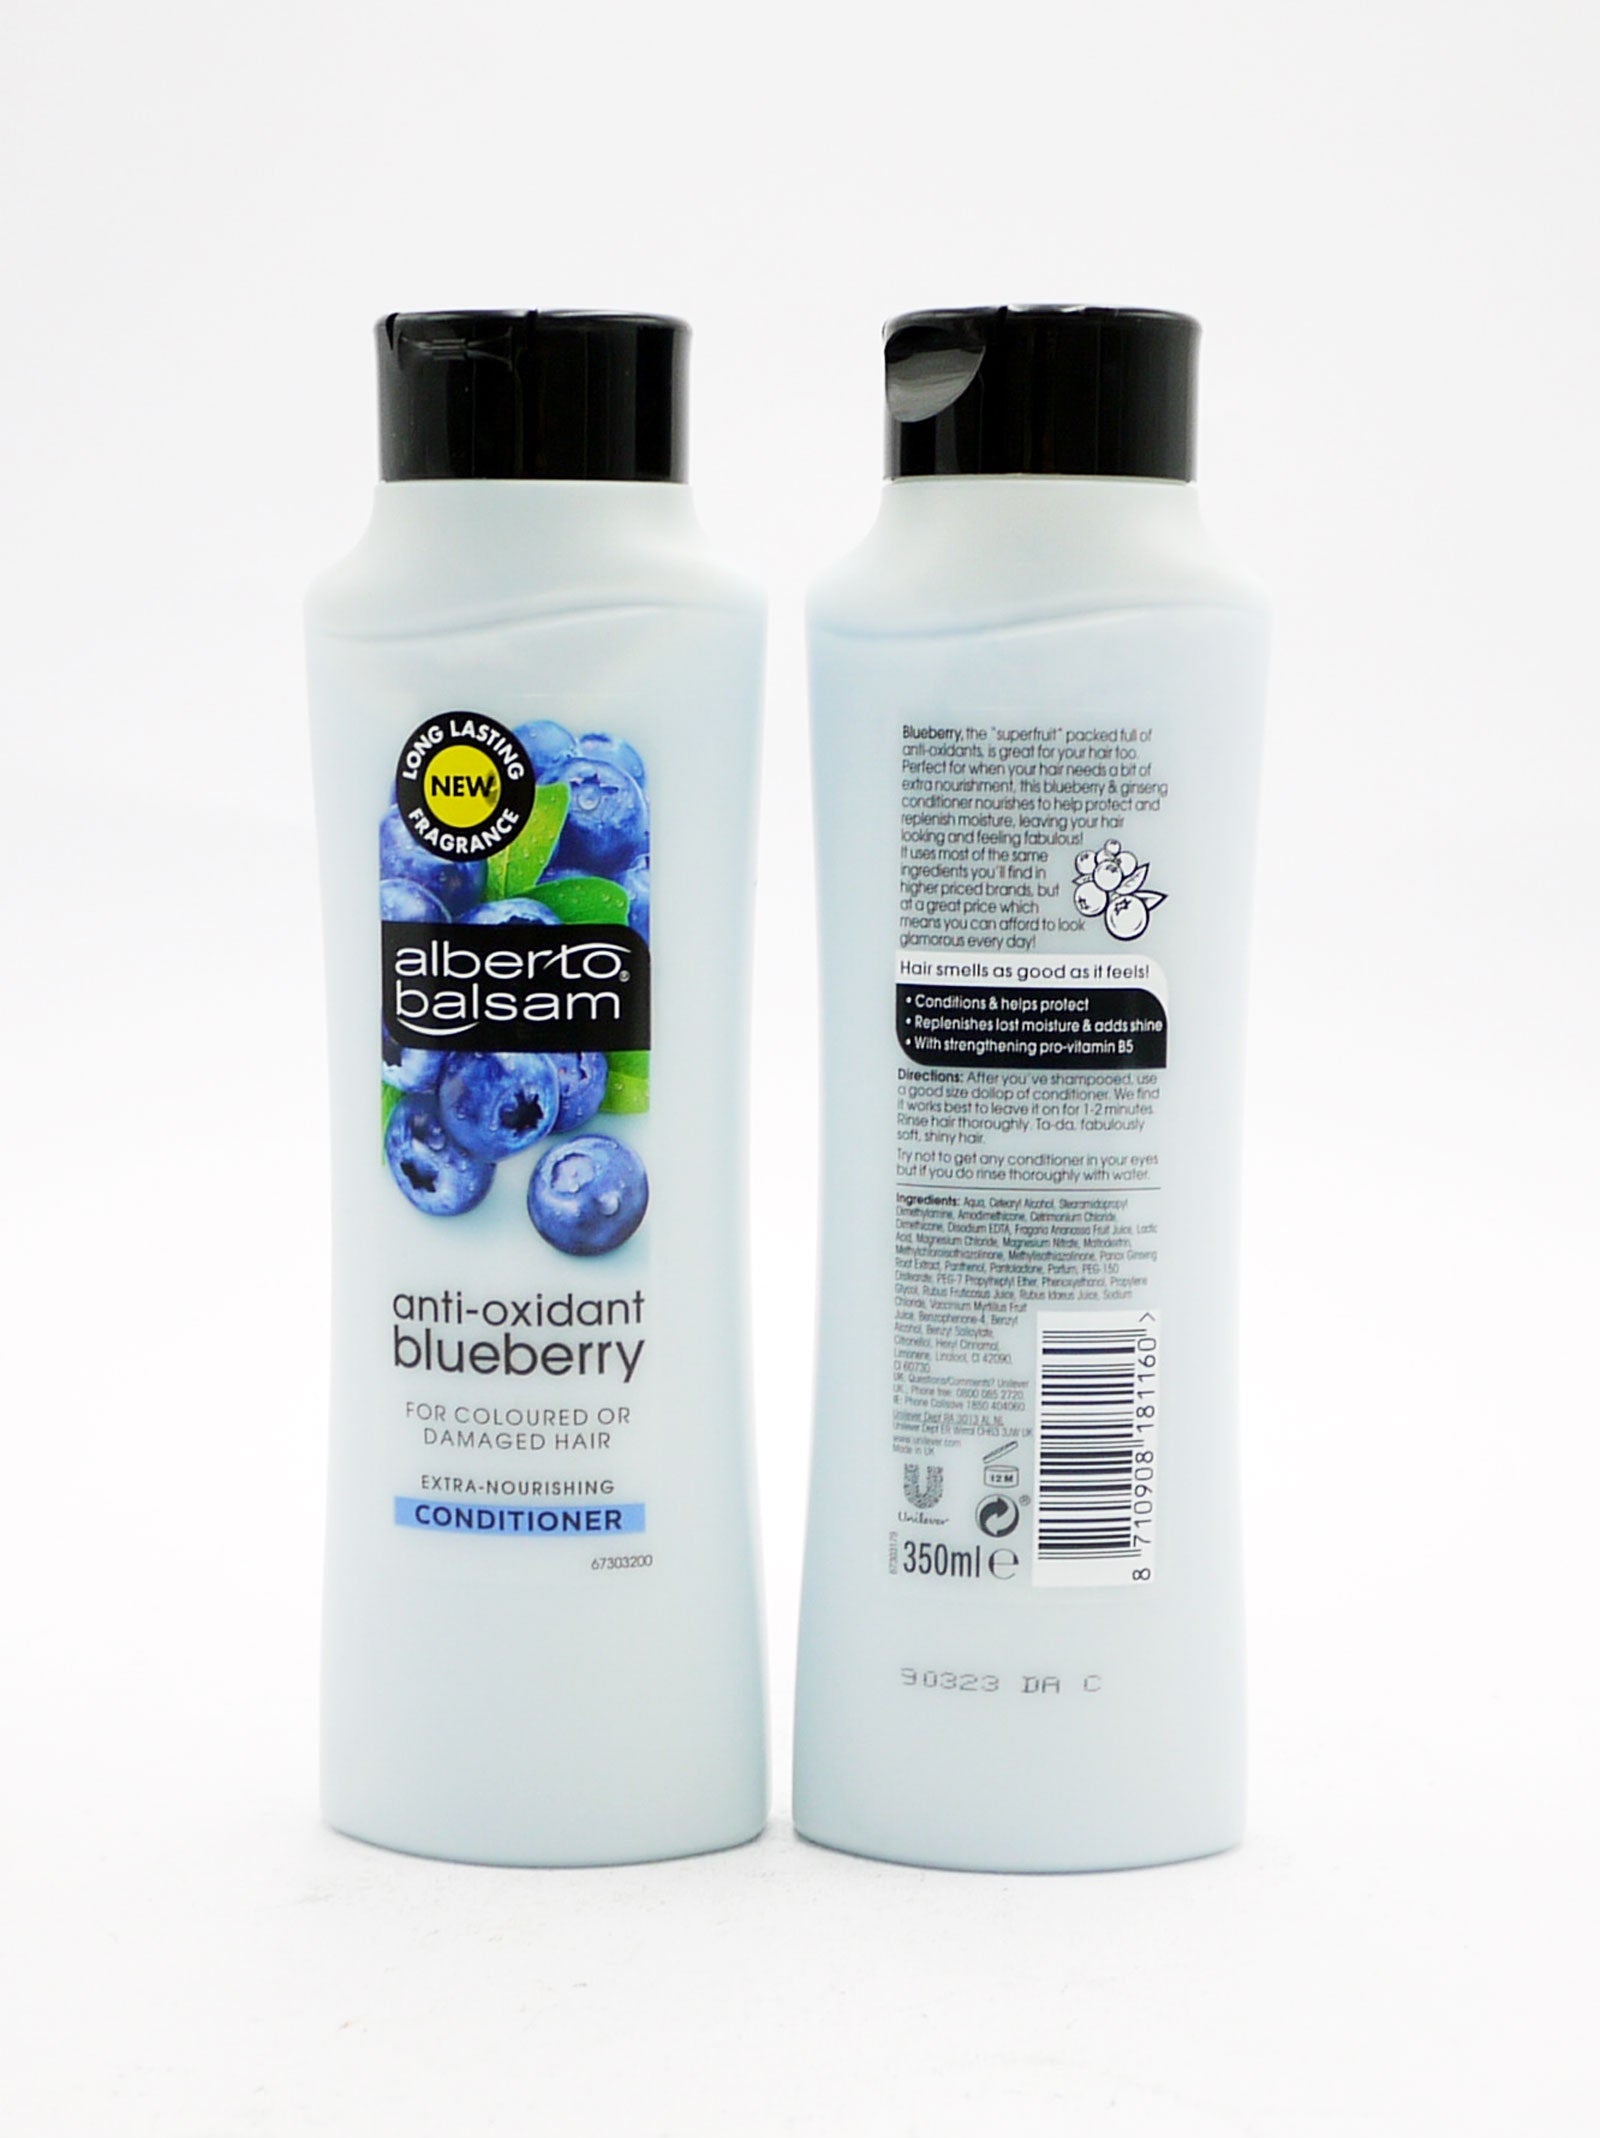 A/Balsam Blueberry Conditioner 350ml*